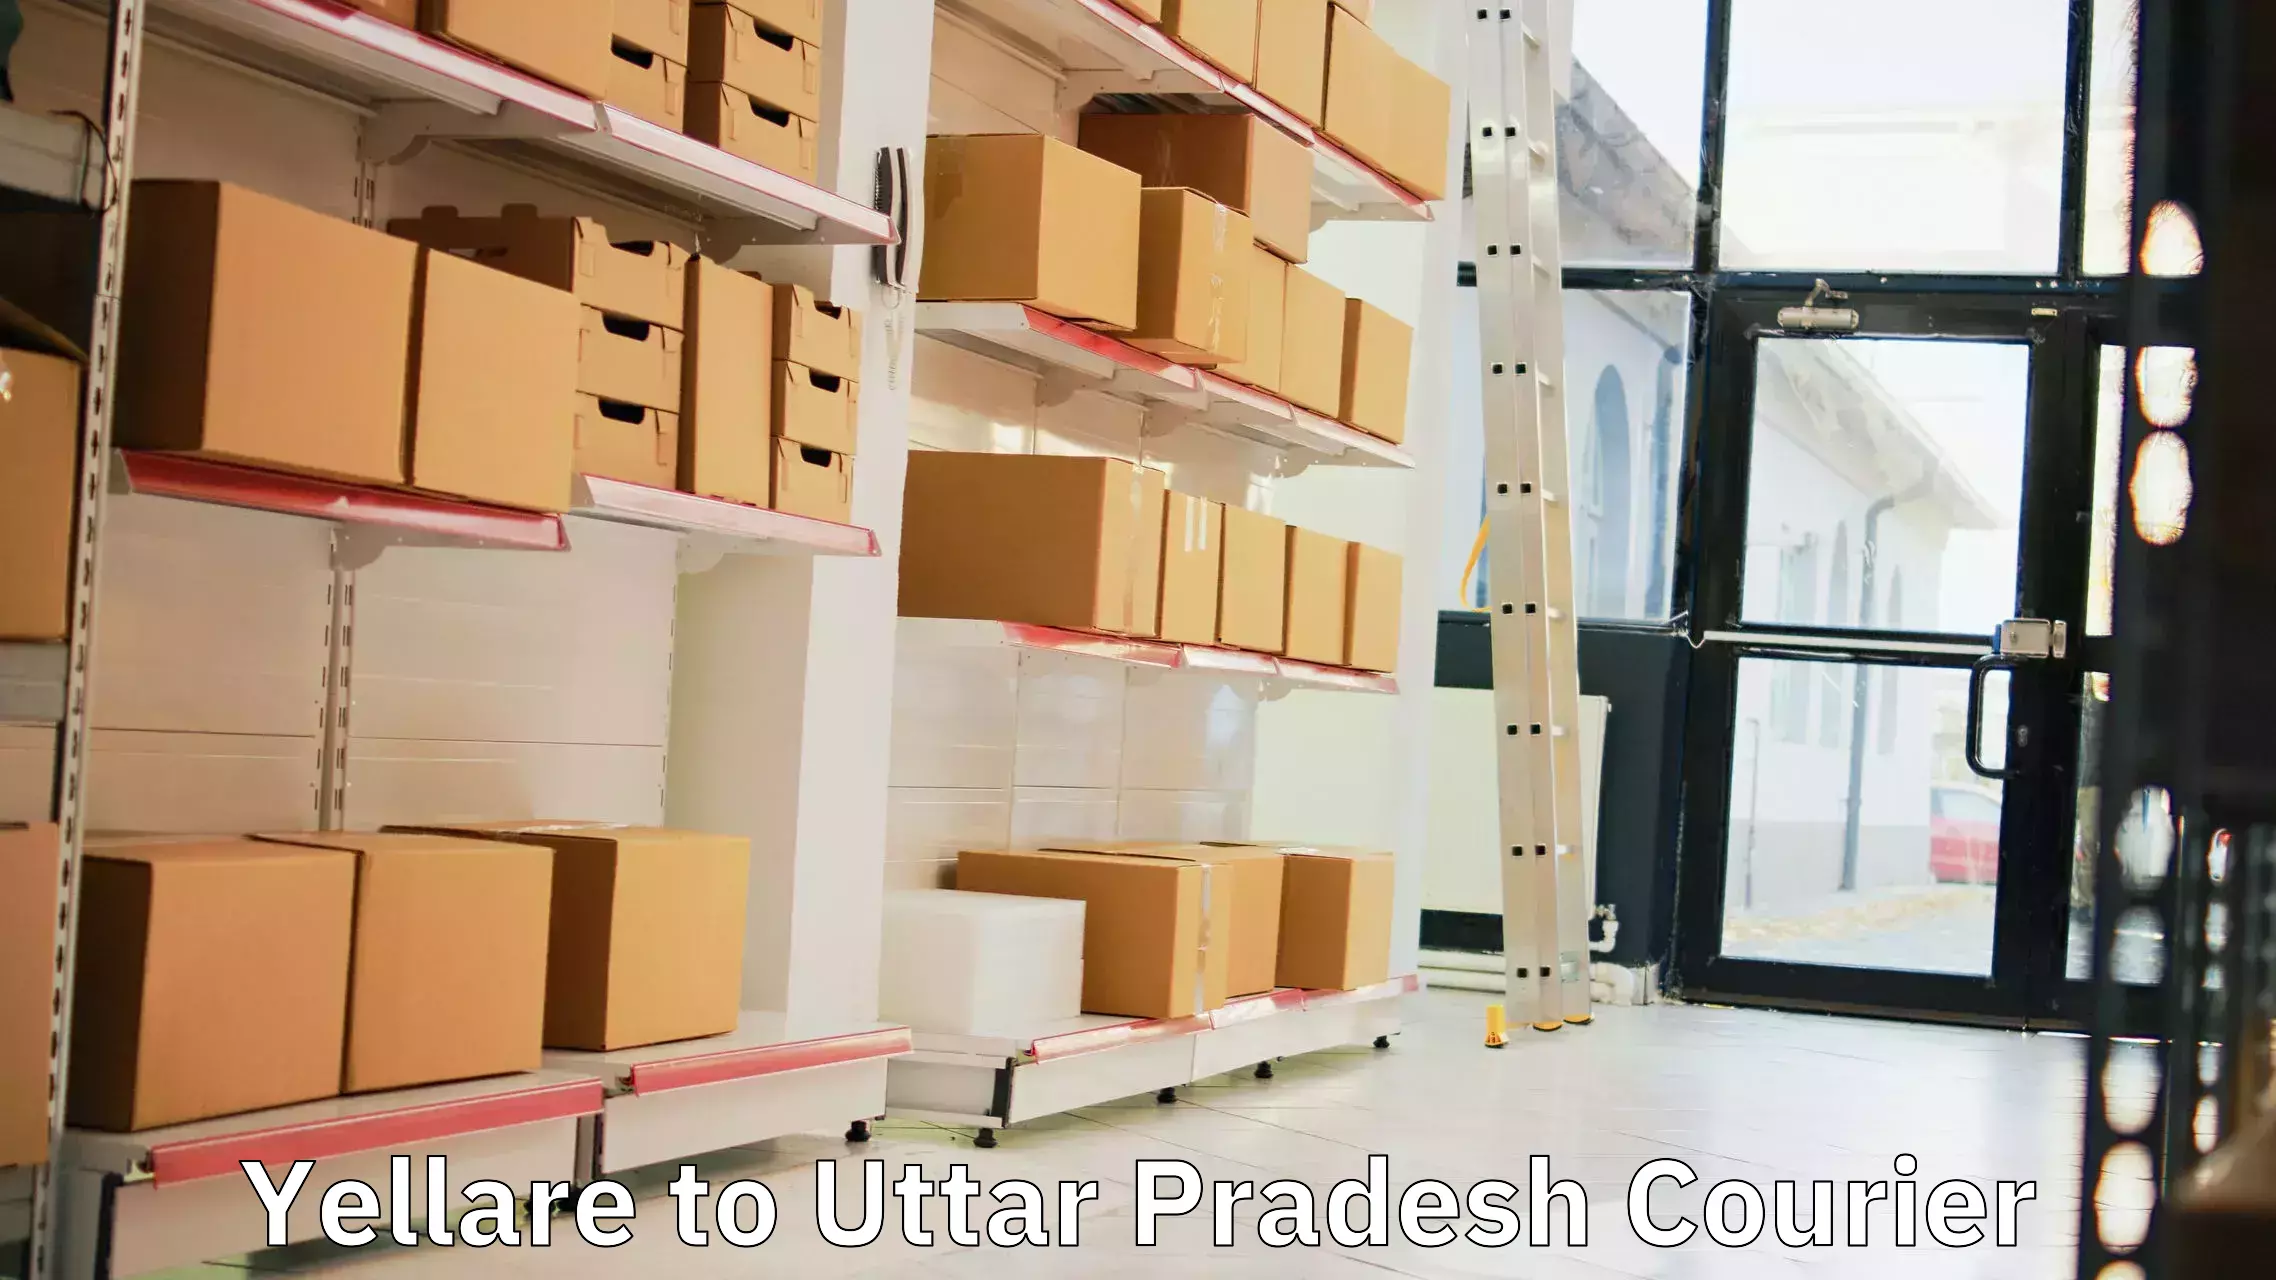 Express courier capabilities Yellare to Aligarh